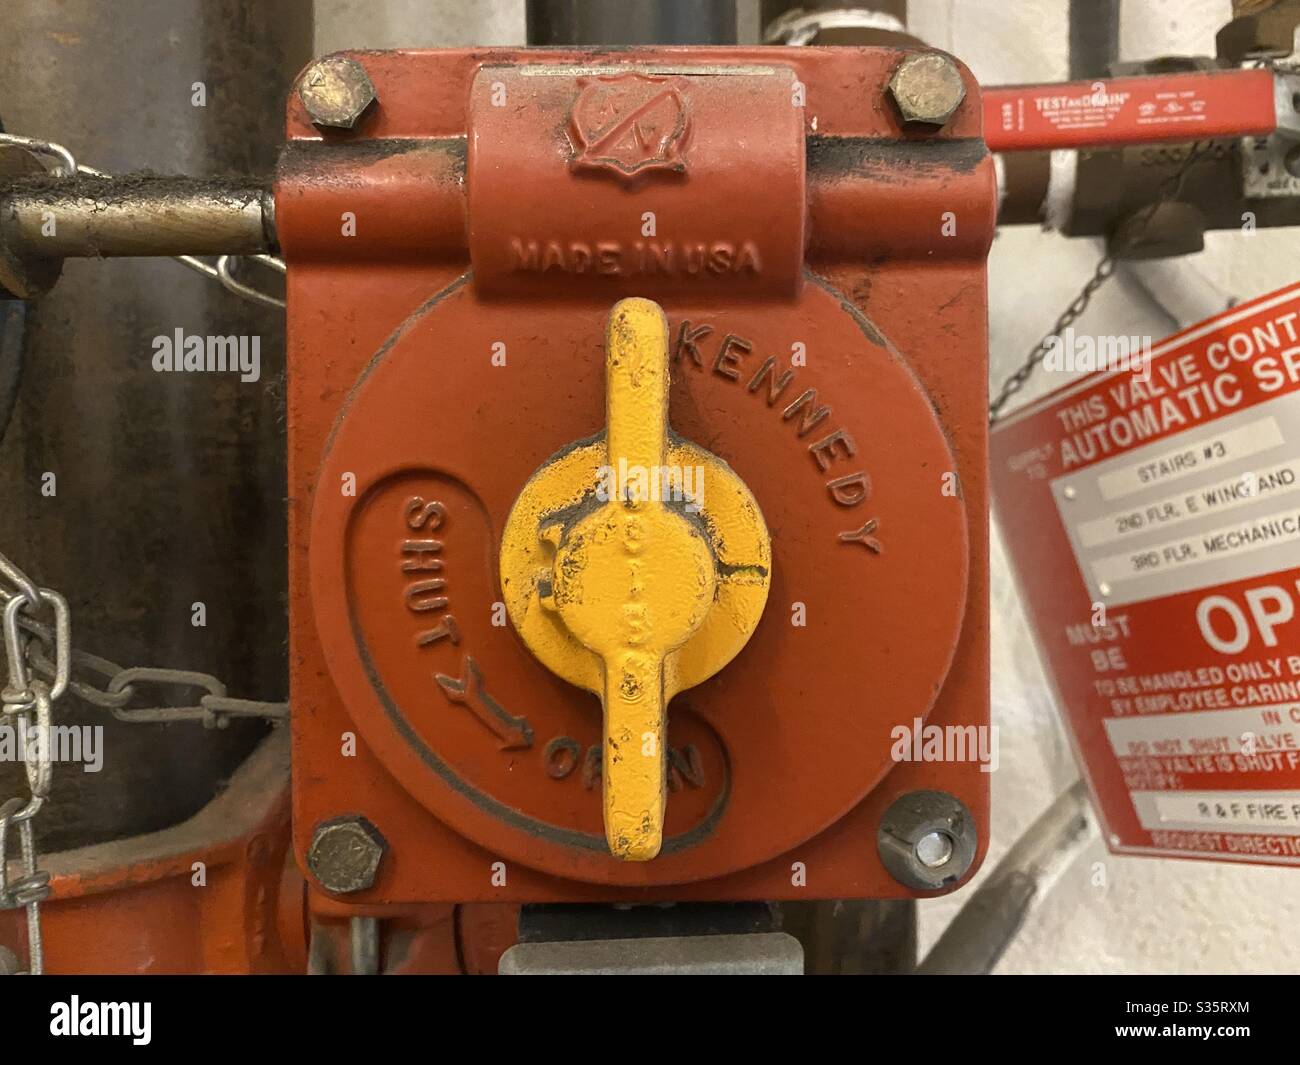 LOS ANGELES, CA, APR 2020: detail of red shut-off valve control with bright yellow tap, part of fire-safety system in historic building Stock Photo